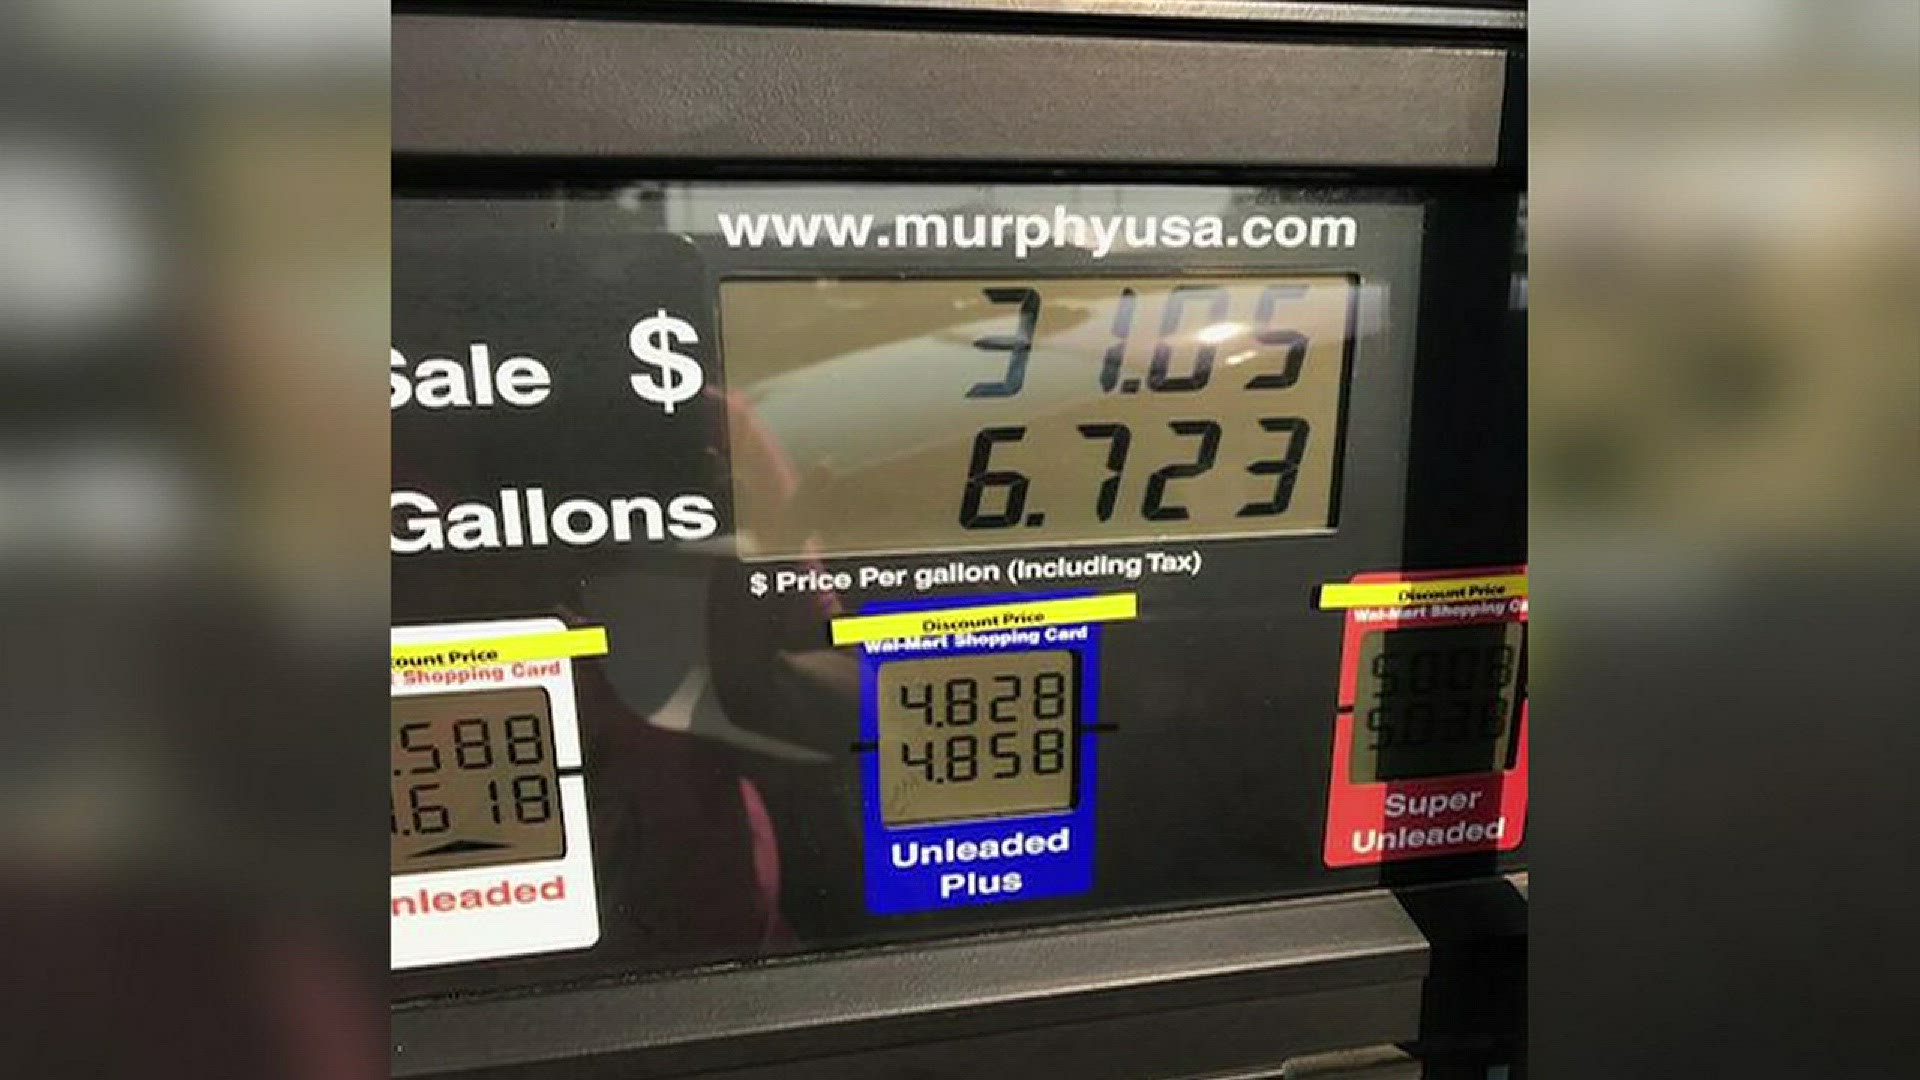 Murphy USA said customers did pay extra for gasoline Friday due to a 'technical glitch' and a 'human error,' and that those customers will be reimbursed.